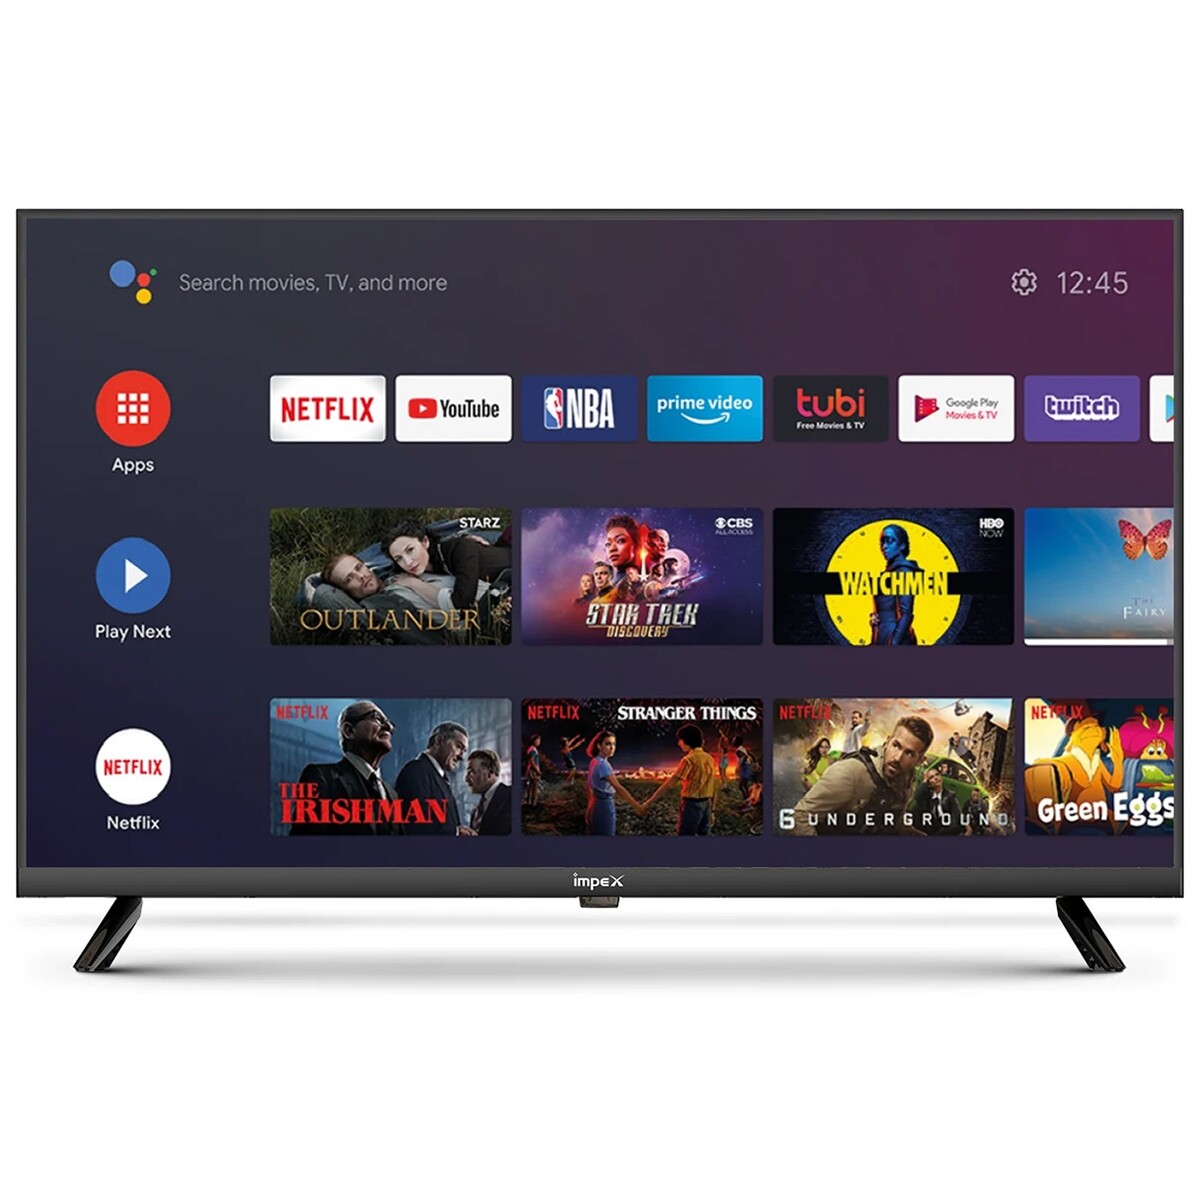 Impex HD Ready Android Smart LED TV Grande 40"